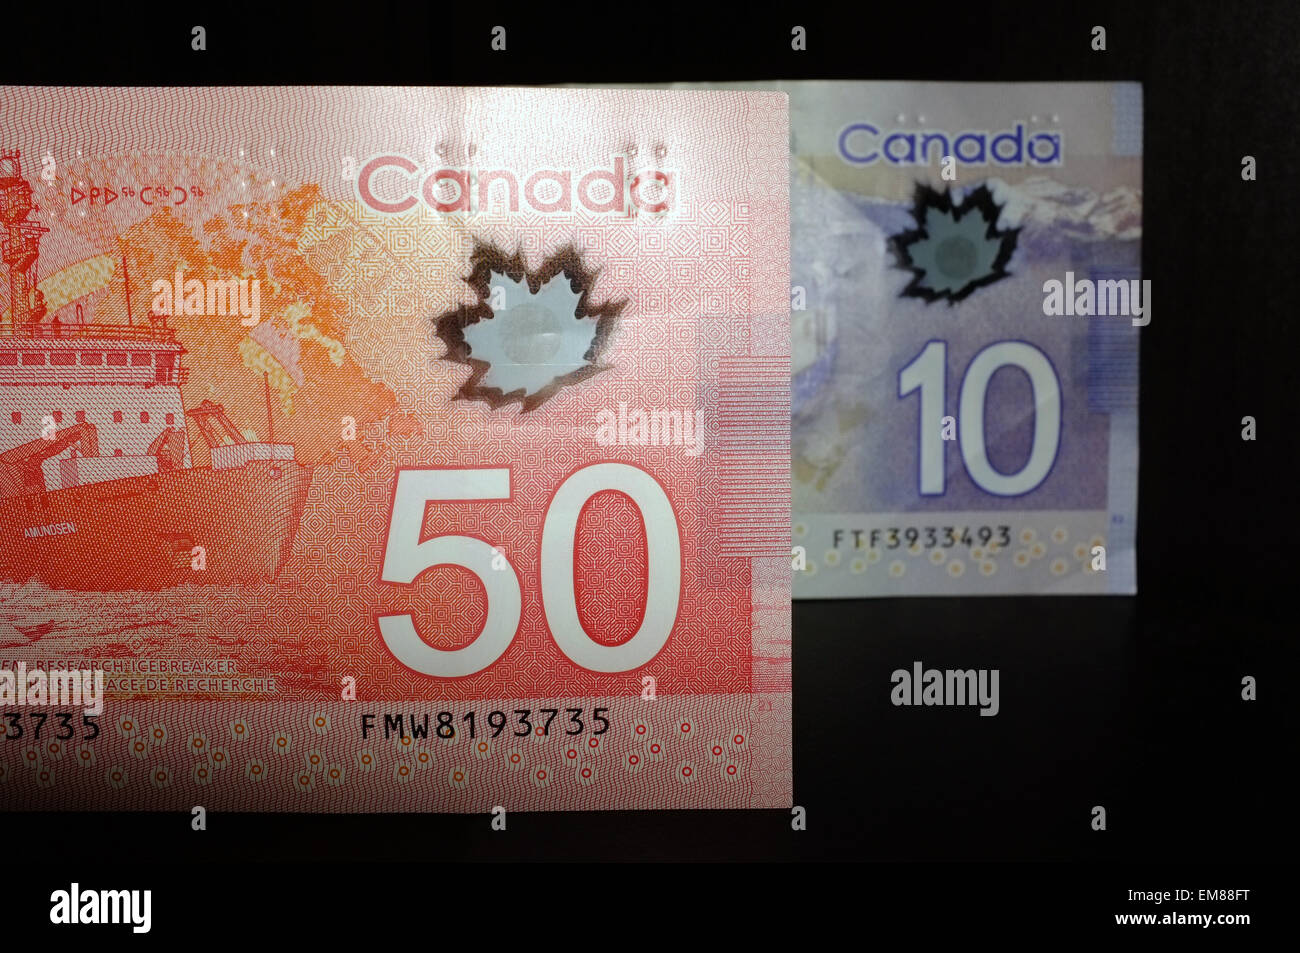 Canadian $20 notes photographed against a black background. Stock Photo